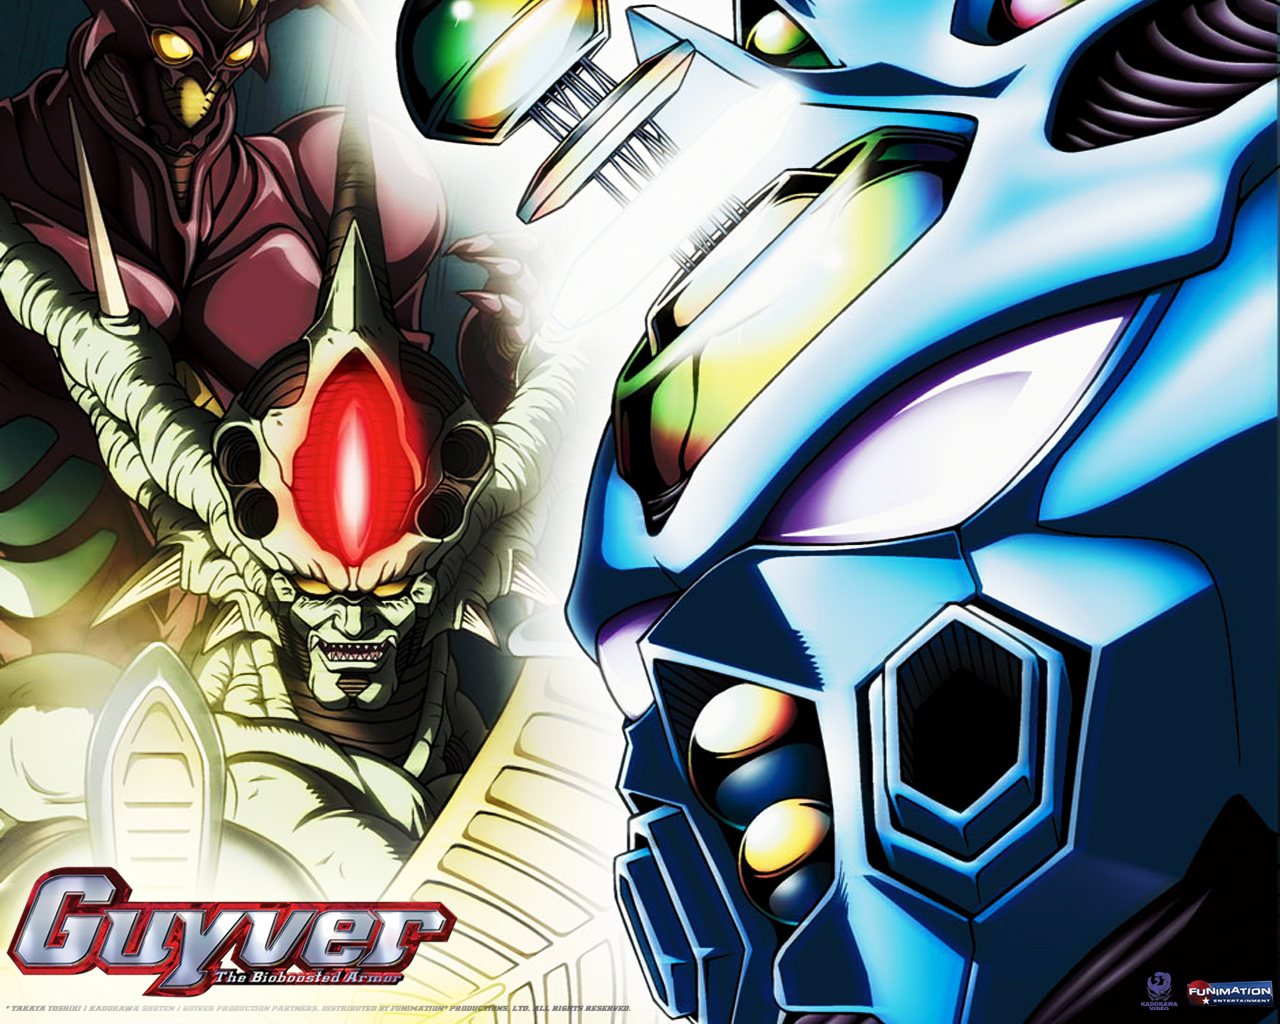 anime, guyver the bioboosted armor iphone wallpaper